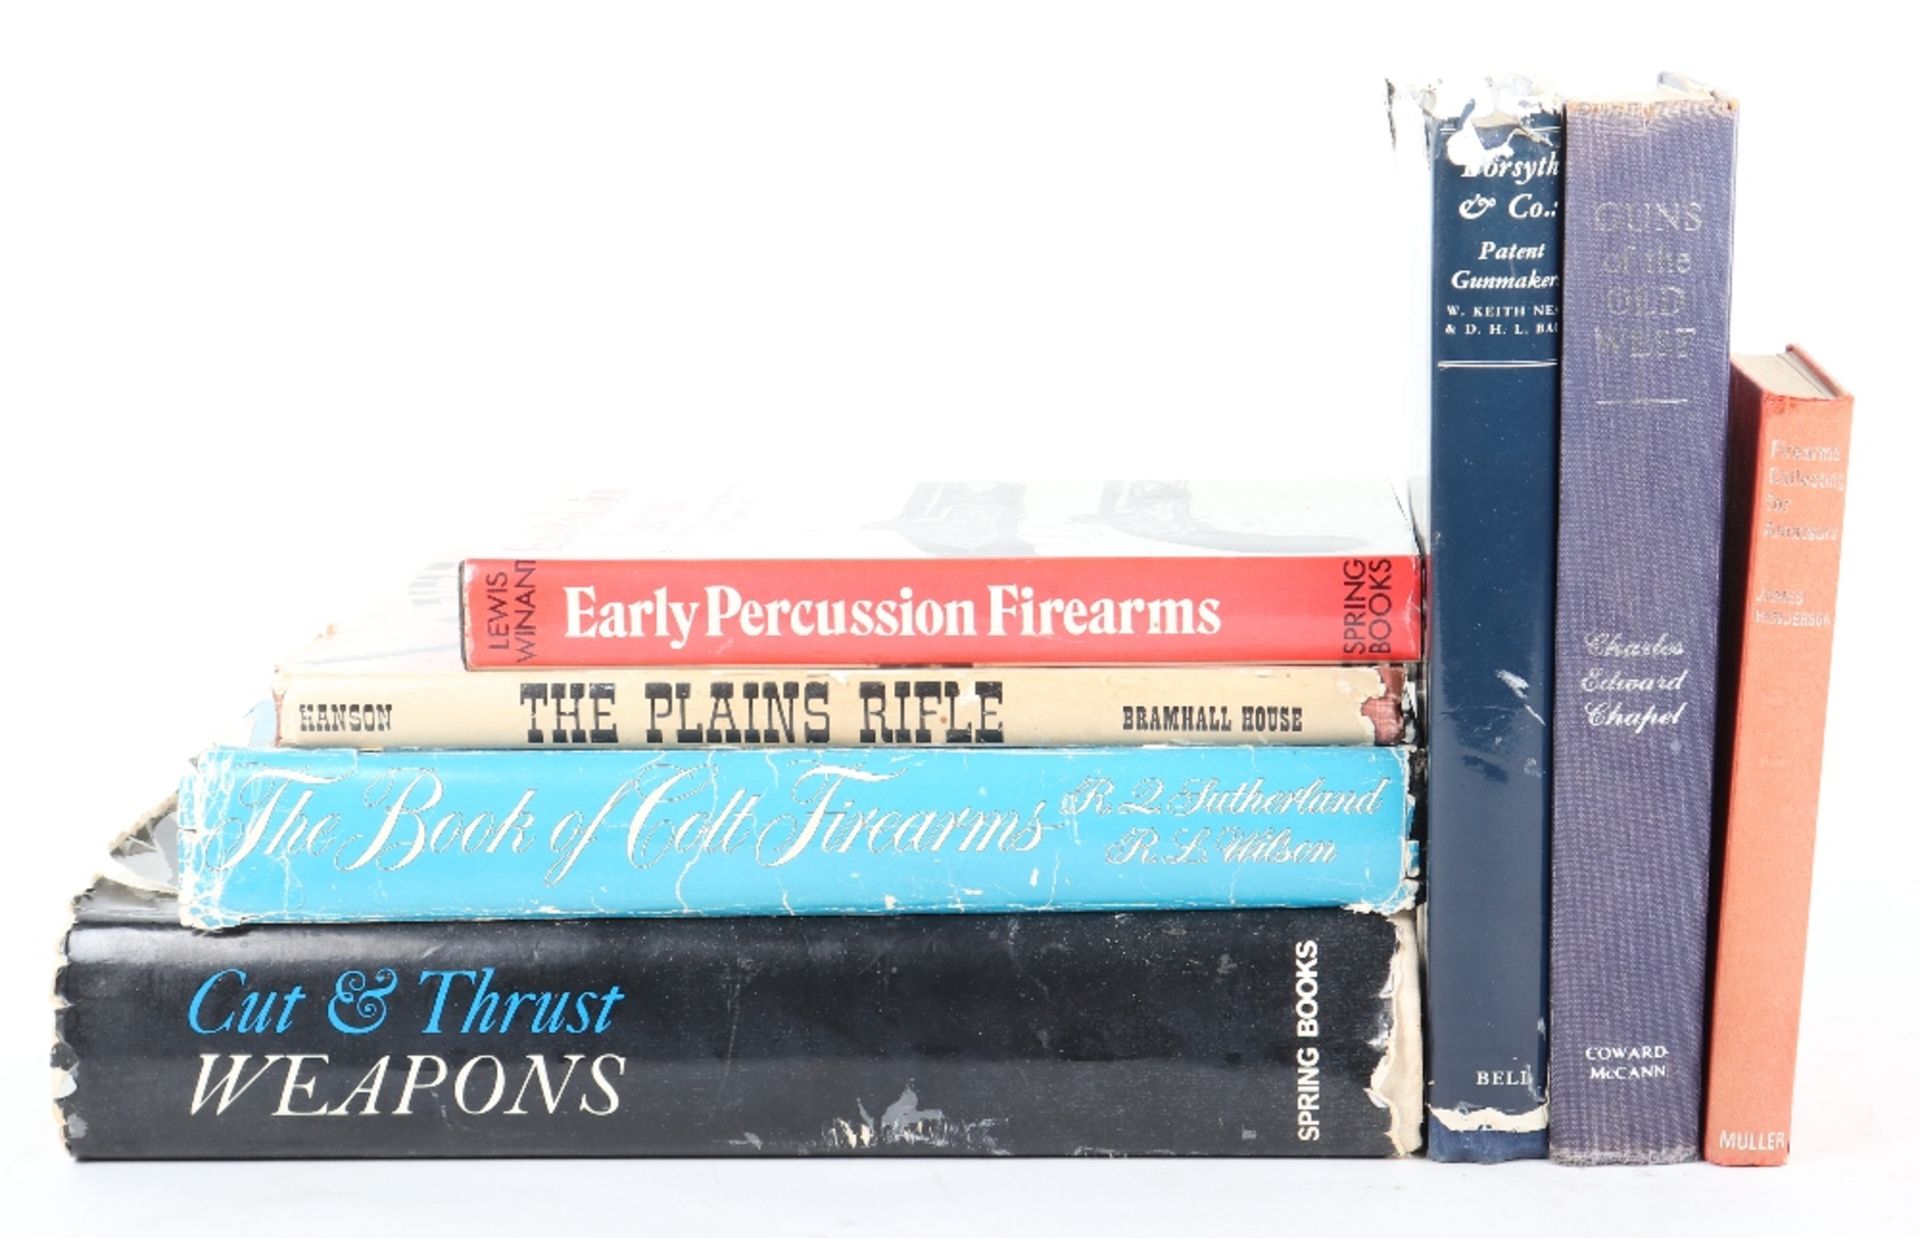 Selection of Books on Guns and Weapons